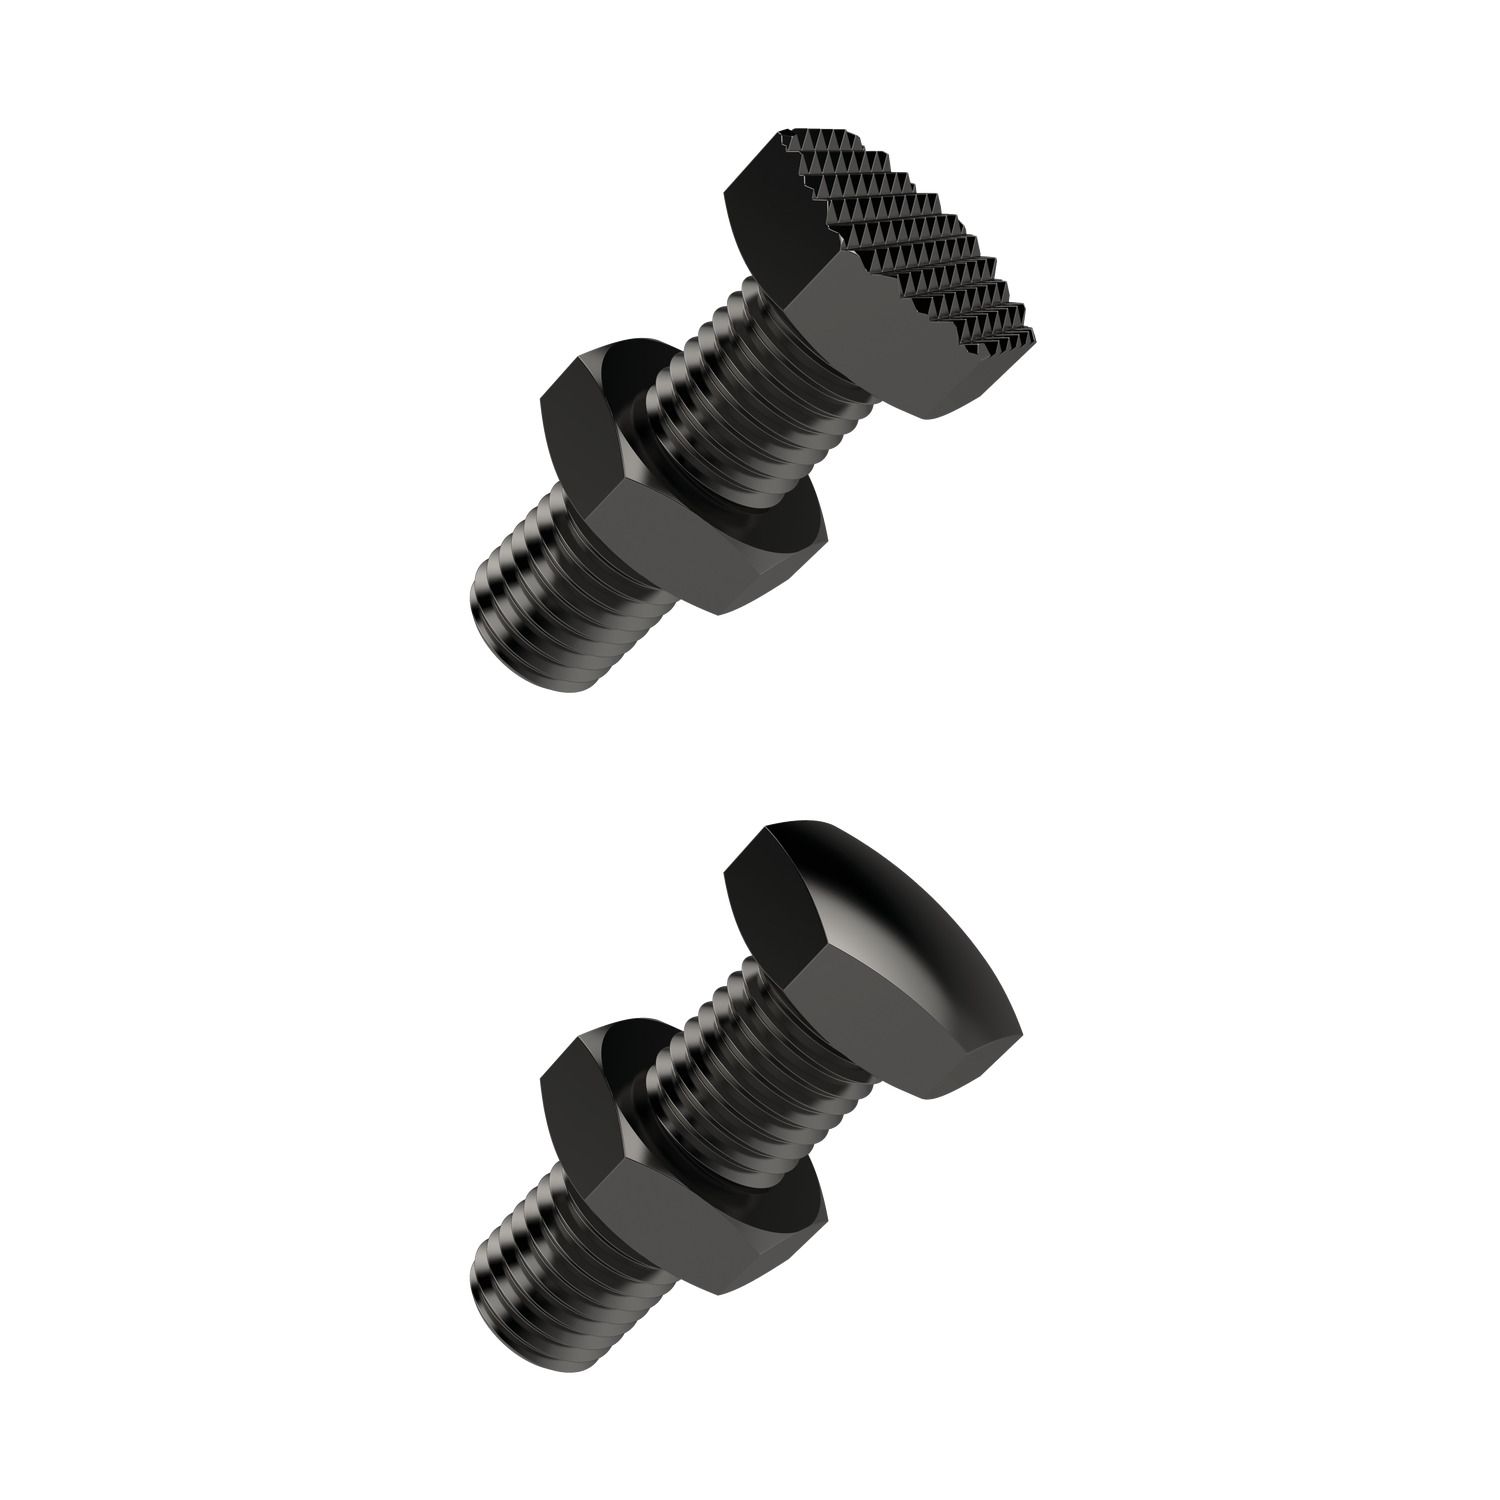 Locating Pins Adjustable locating pins. Body and nut: heat treated steel, tempered, blackened and support induction hardened, quality 10,9. Ideal for use as seats and stops.